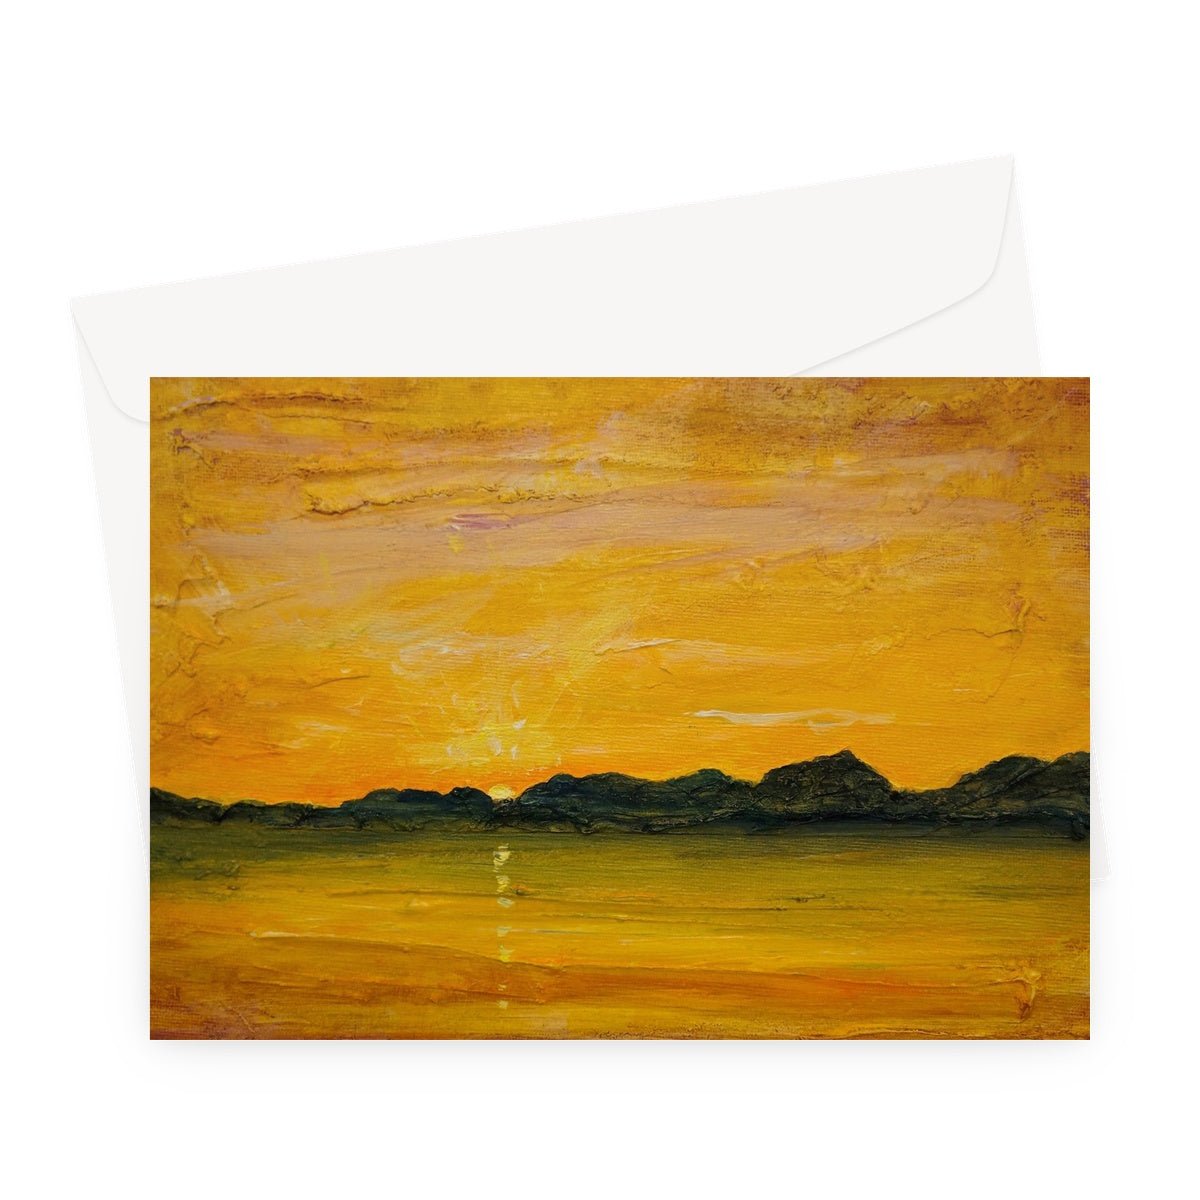 Jura Sunset Art Gifts Greeting Card-Greetings Cards-Hebridean Islands Art Gallery-A5 Landscape-1 Card-Paintings, Prints, Homeware, Art Gifts From Scotland By Scottish Artist Kevin Hunter